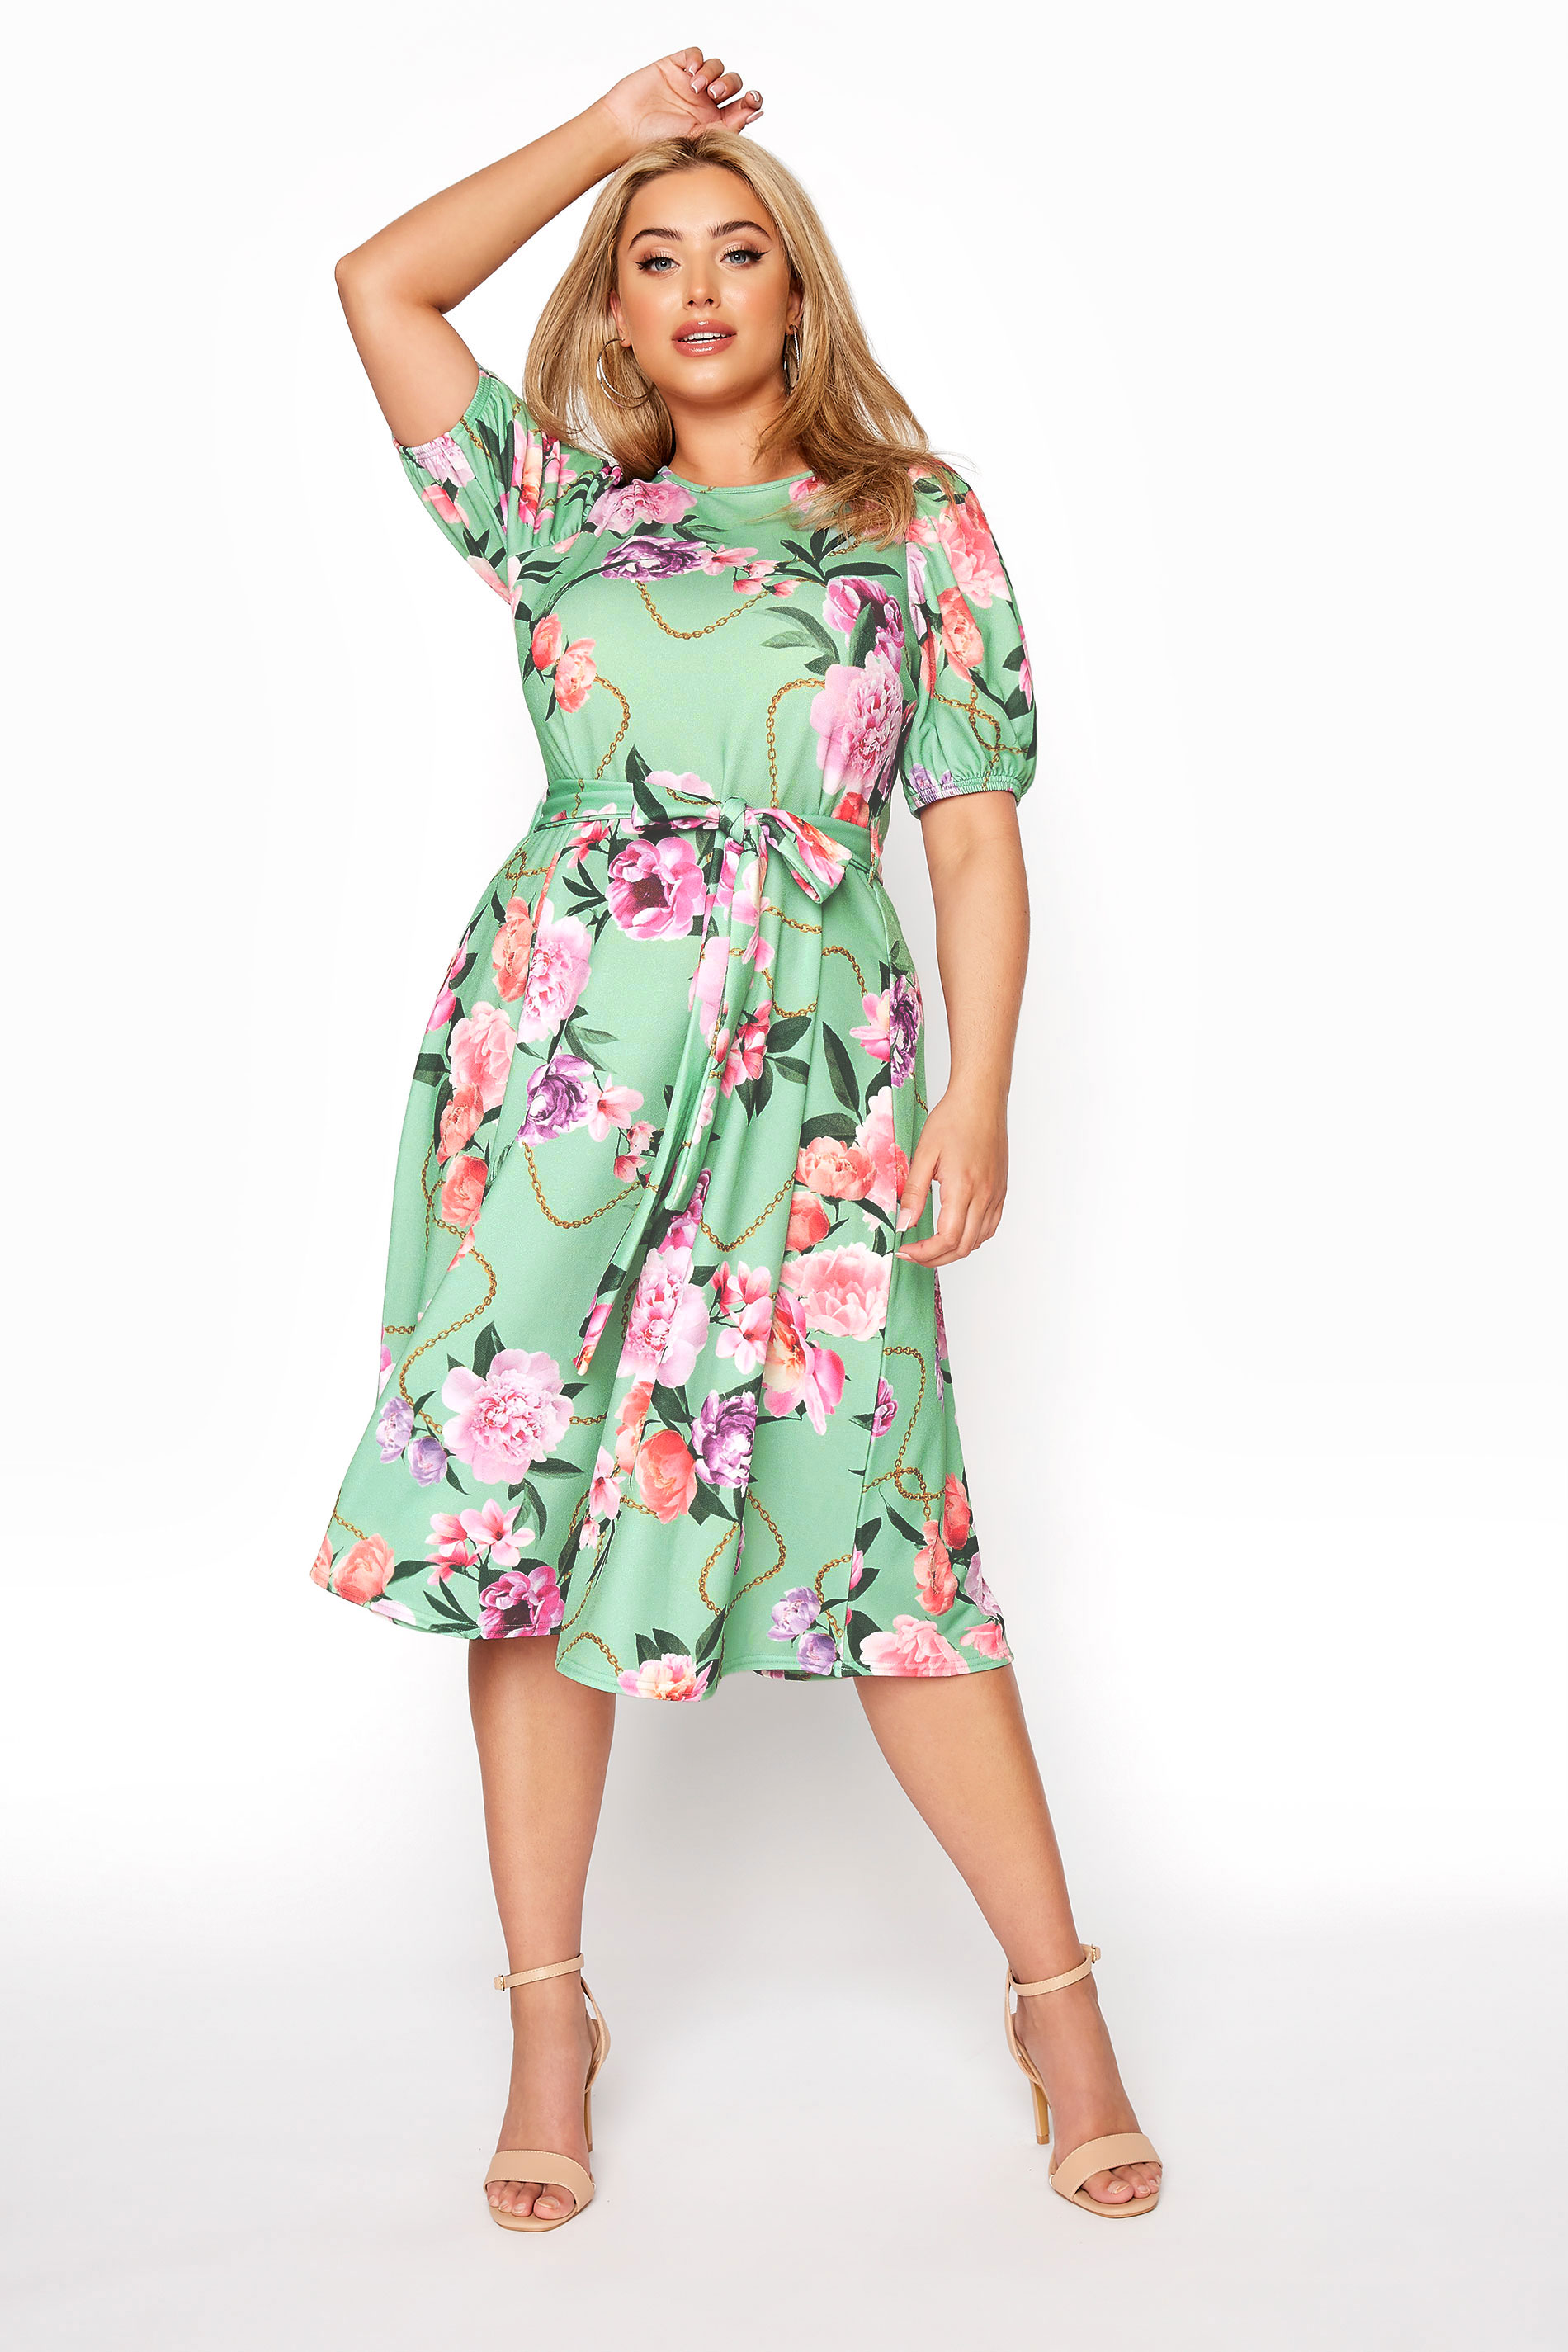 Robes Grande Taille Grande taille  Robes Patineuses | YOURS LONDON - Robe Verte Floral Manches Bouffantes - IF54685